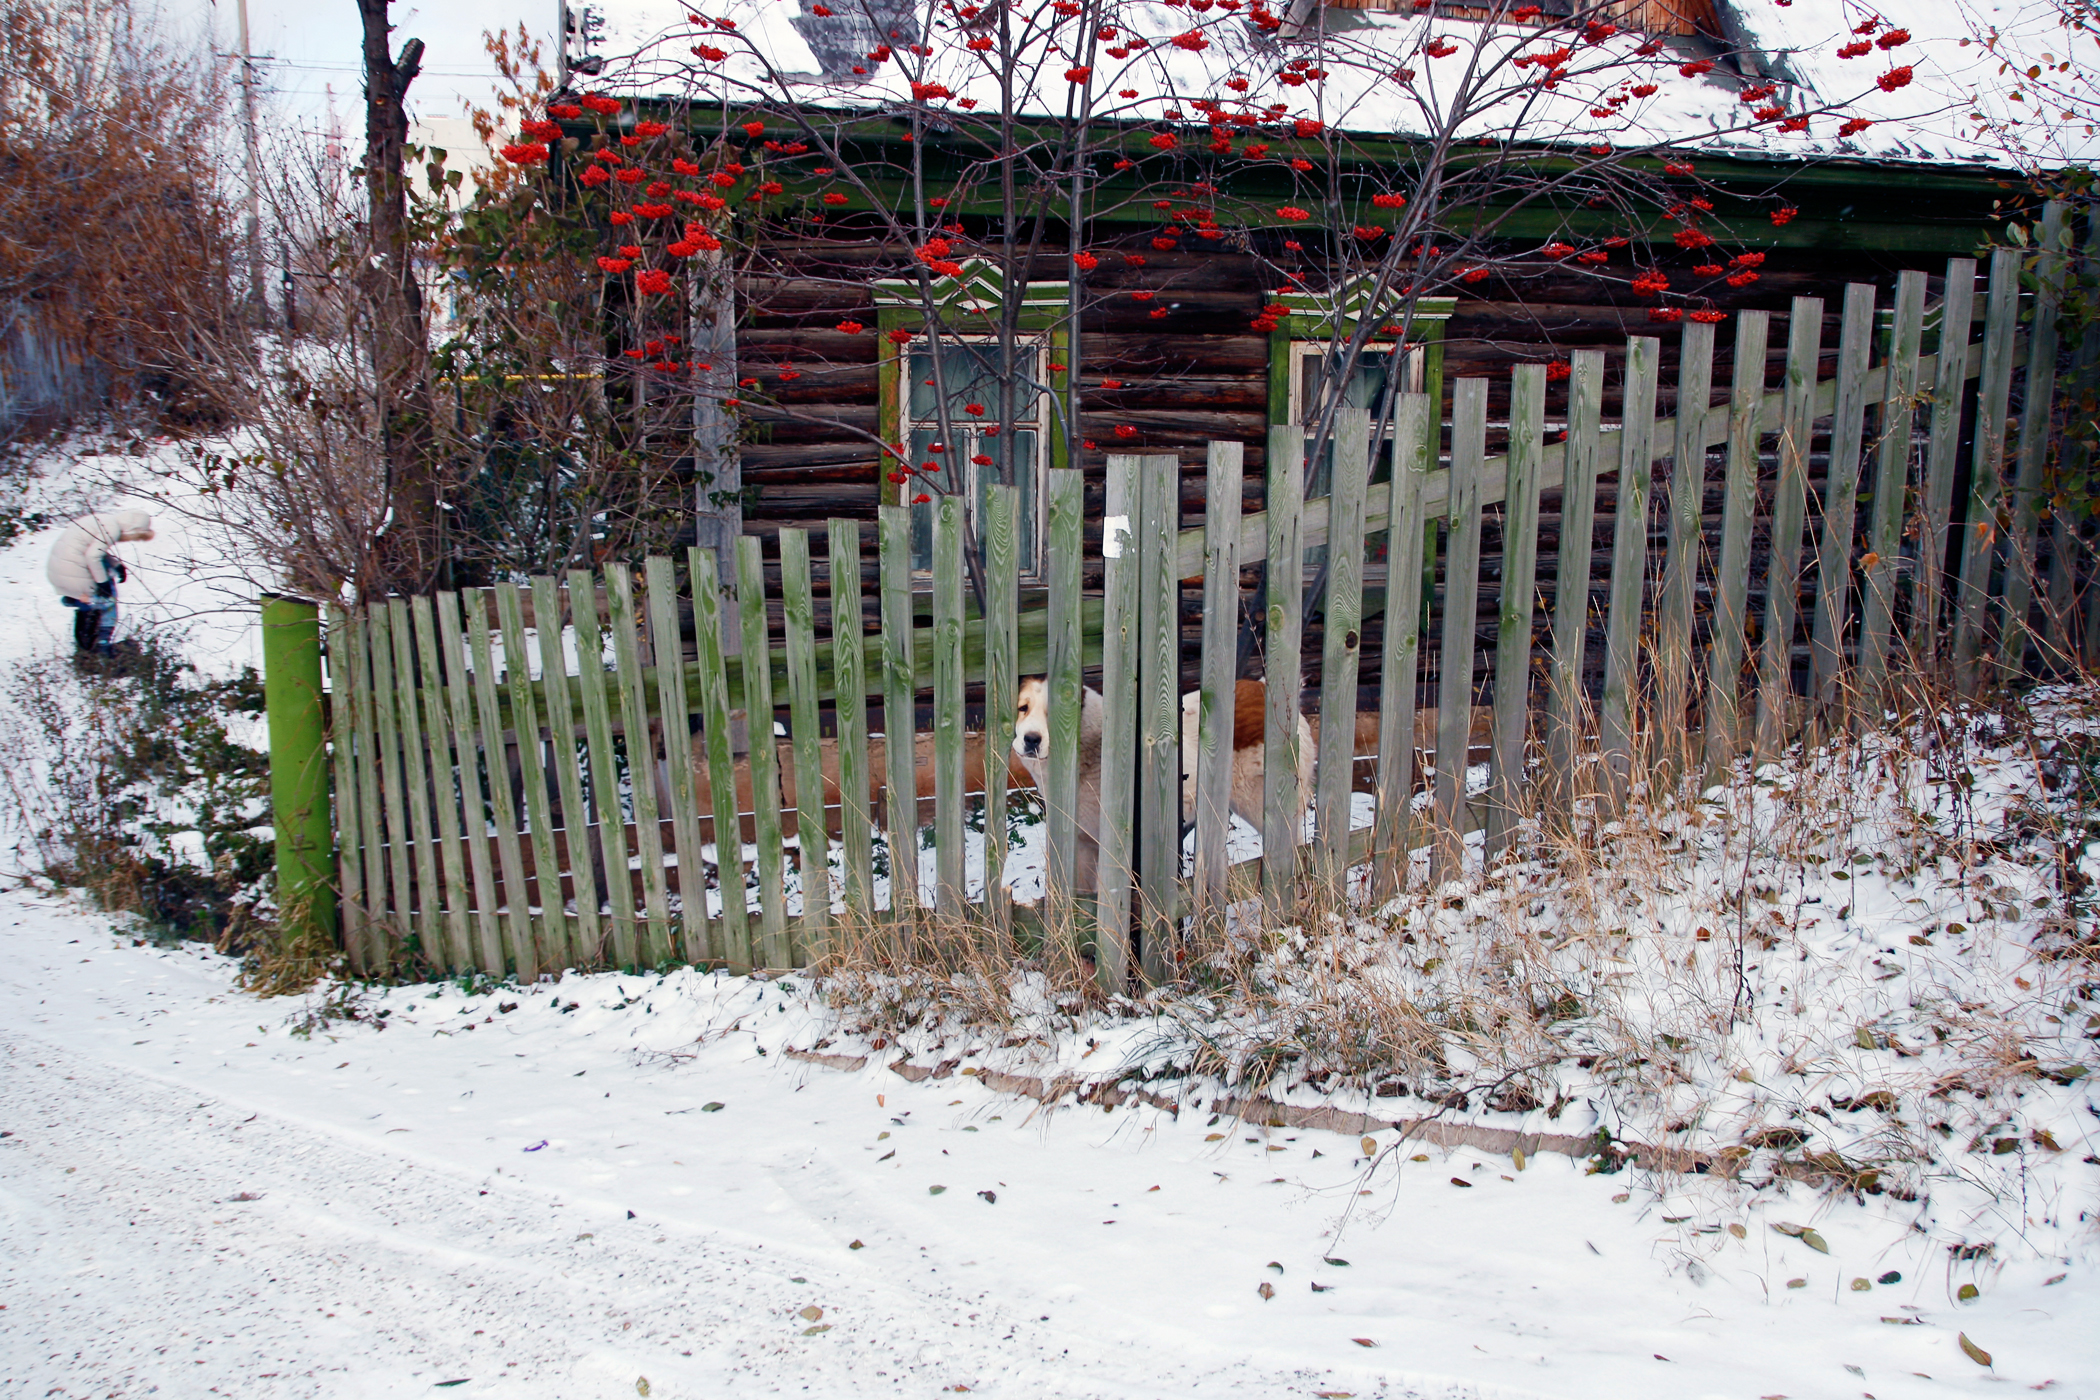 Dog, fence and old house photo